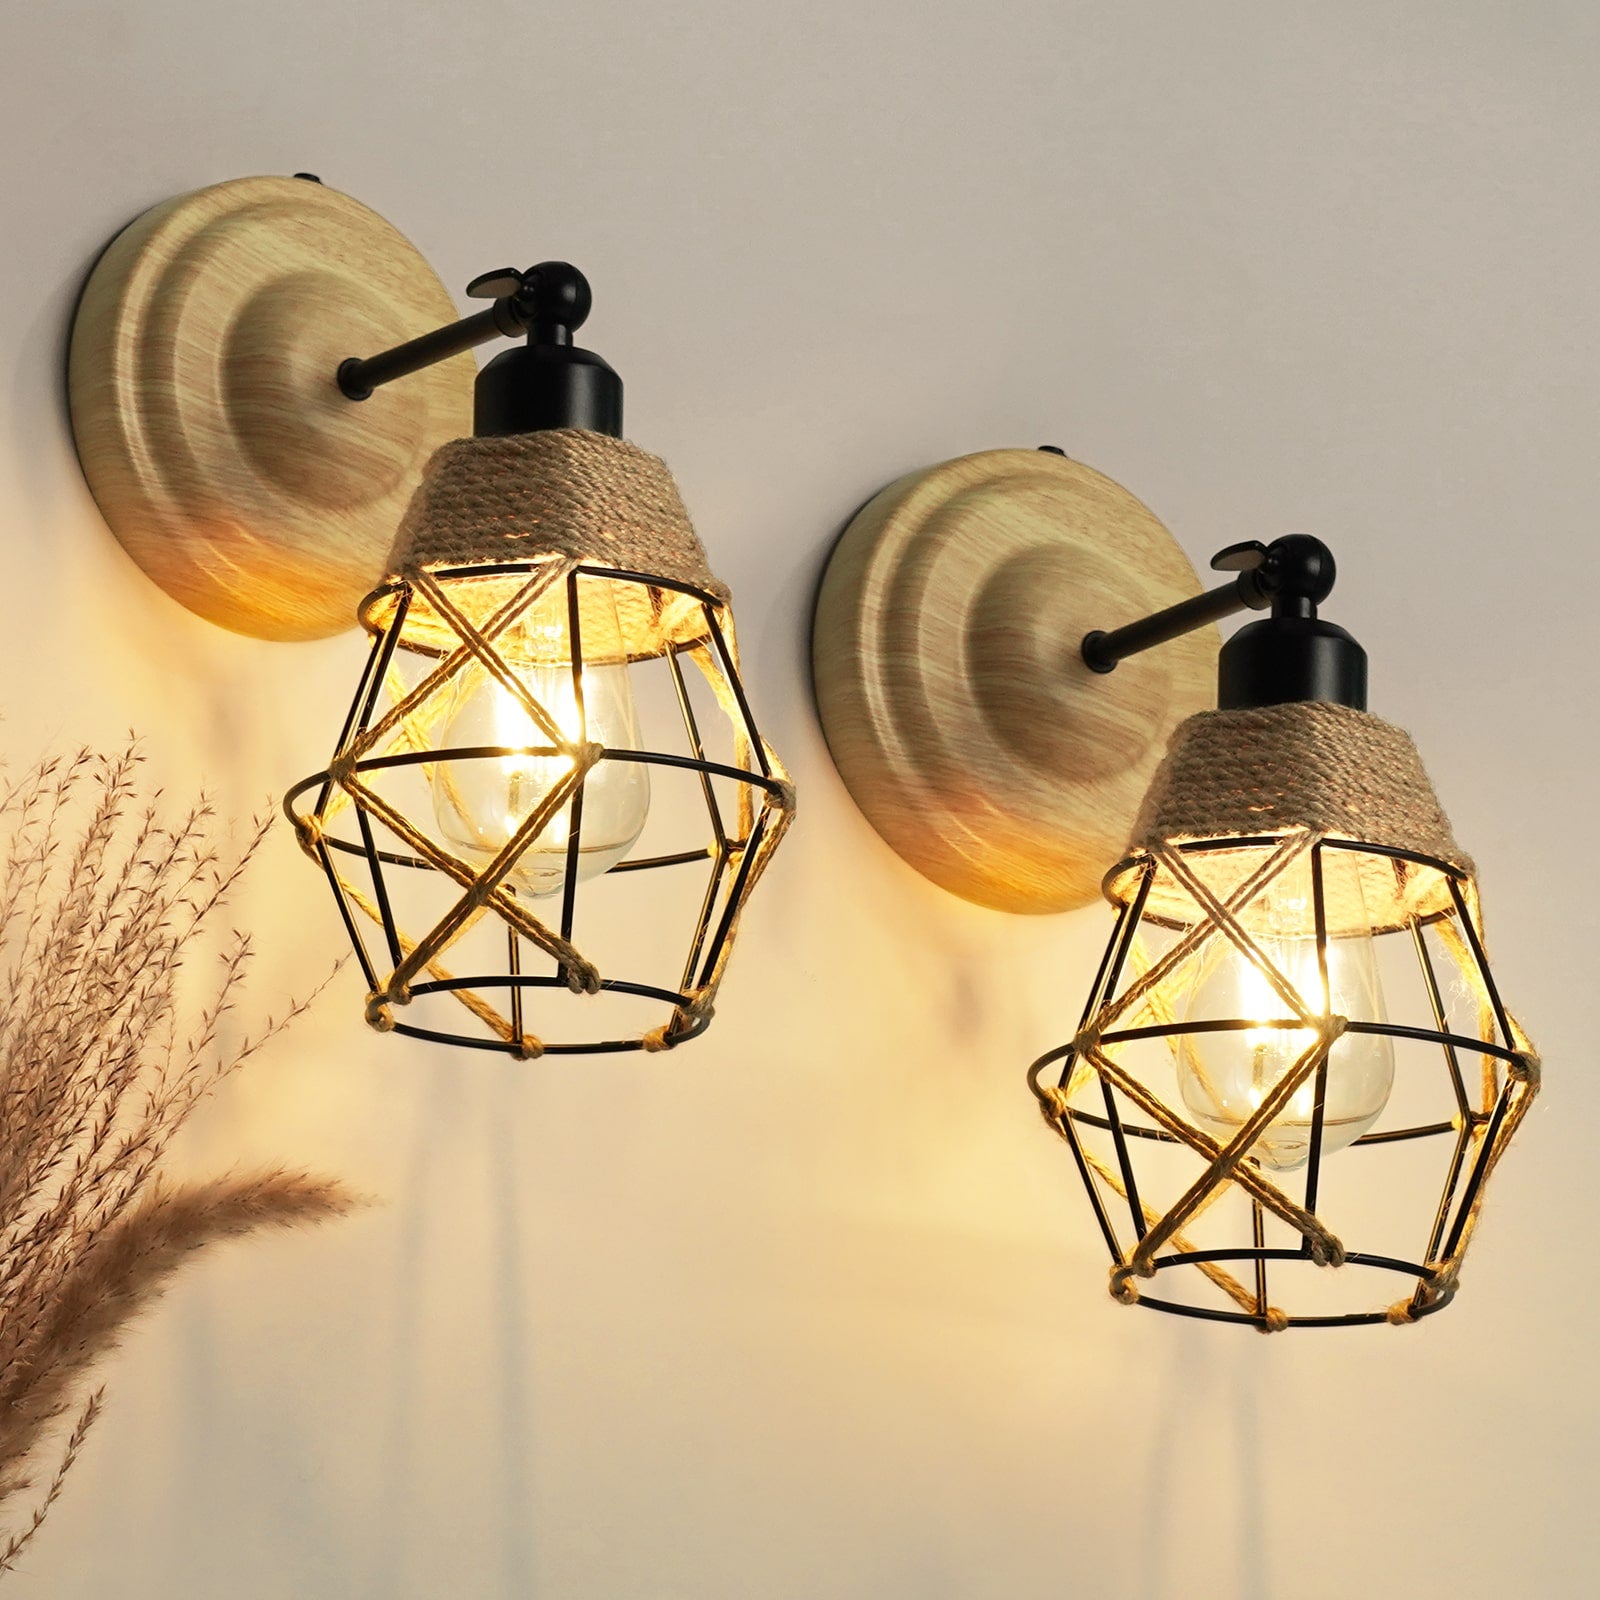 N06  Hemp Rope Iron Lampshade Battery Operated Wall Light for Living Room